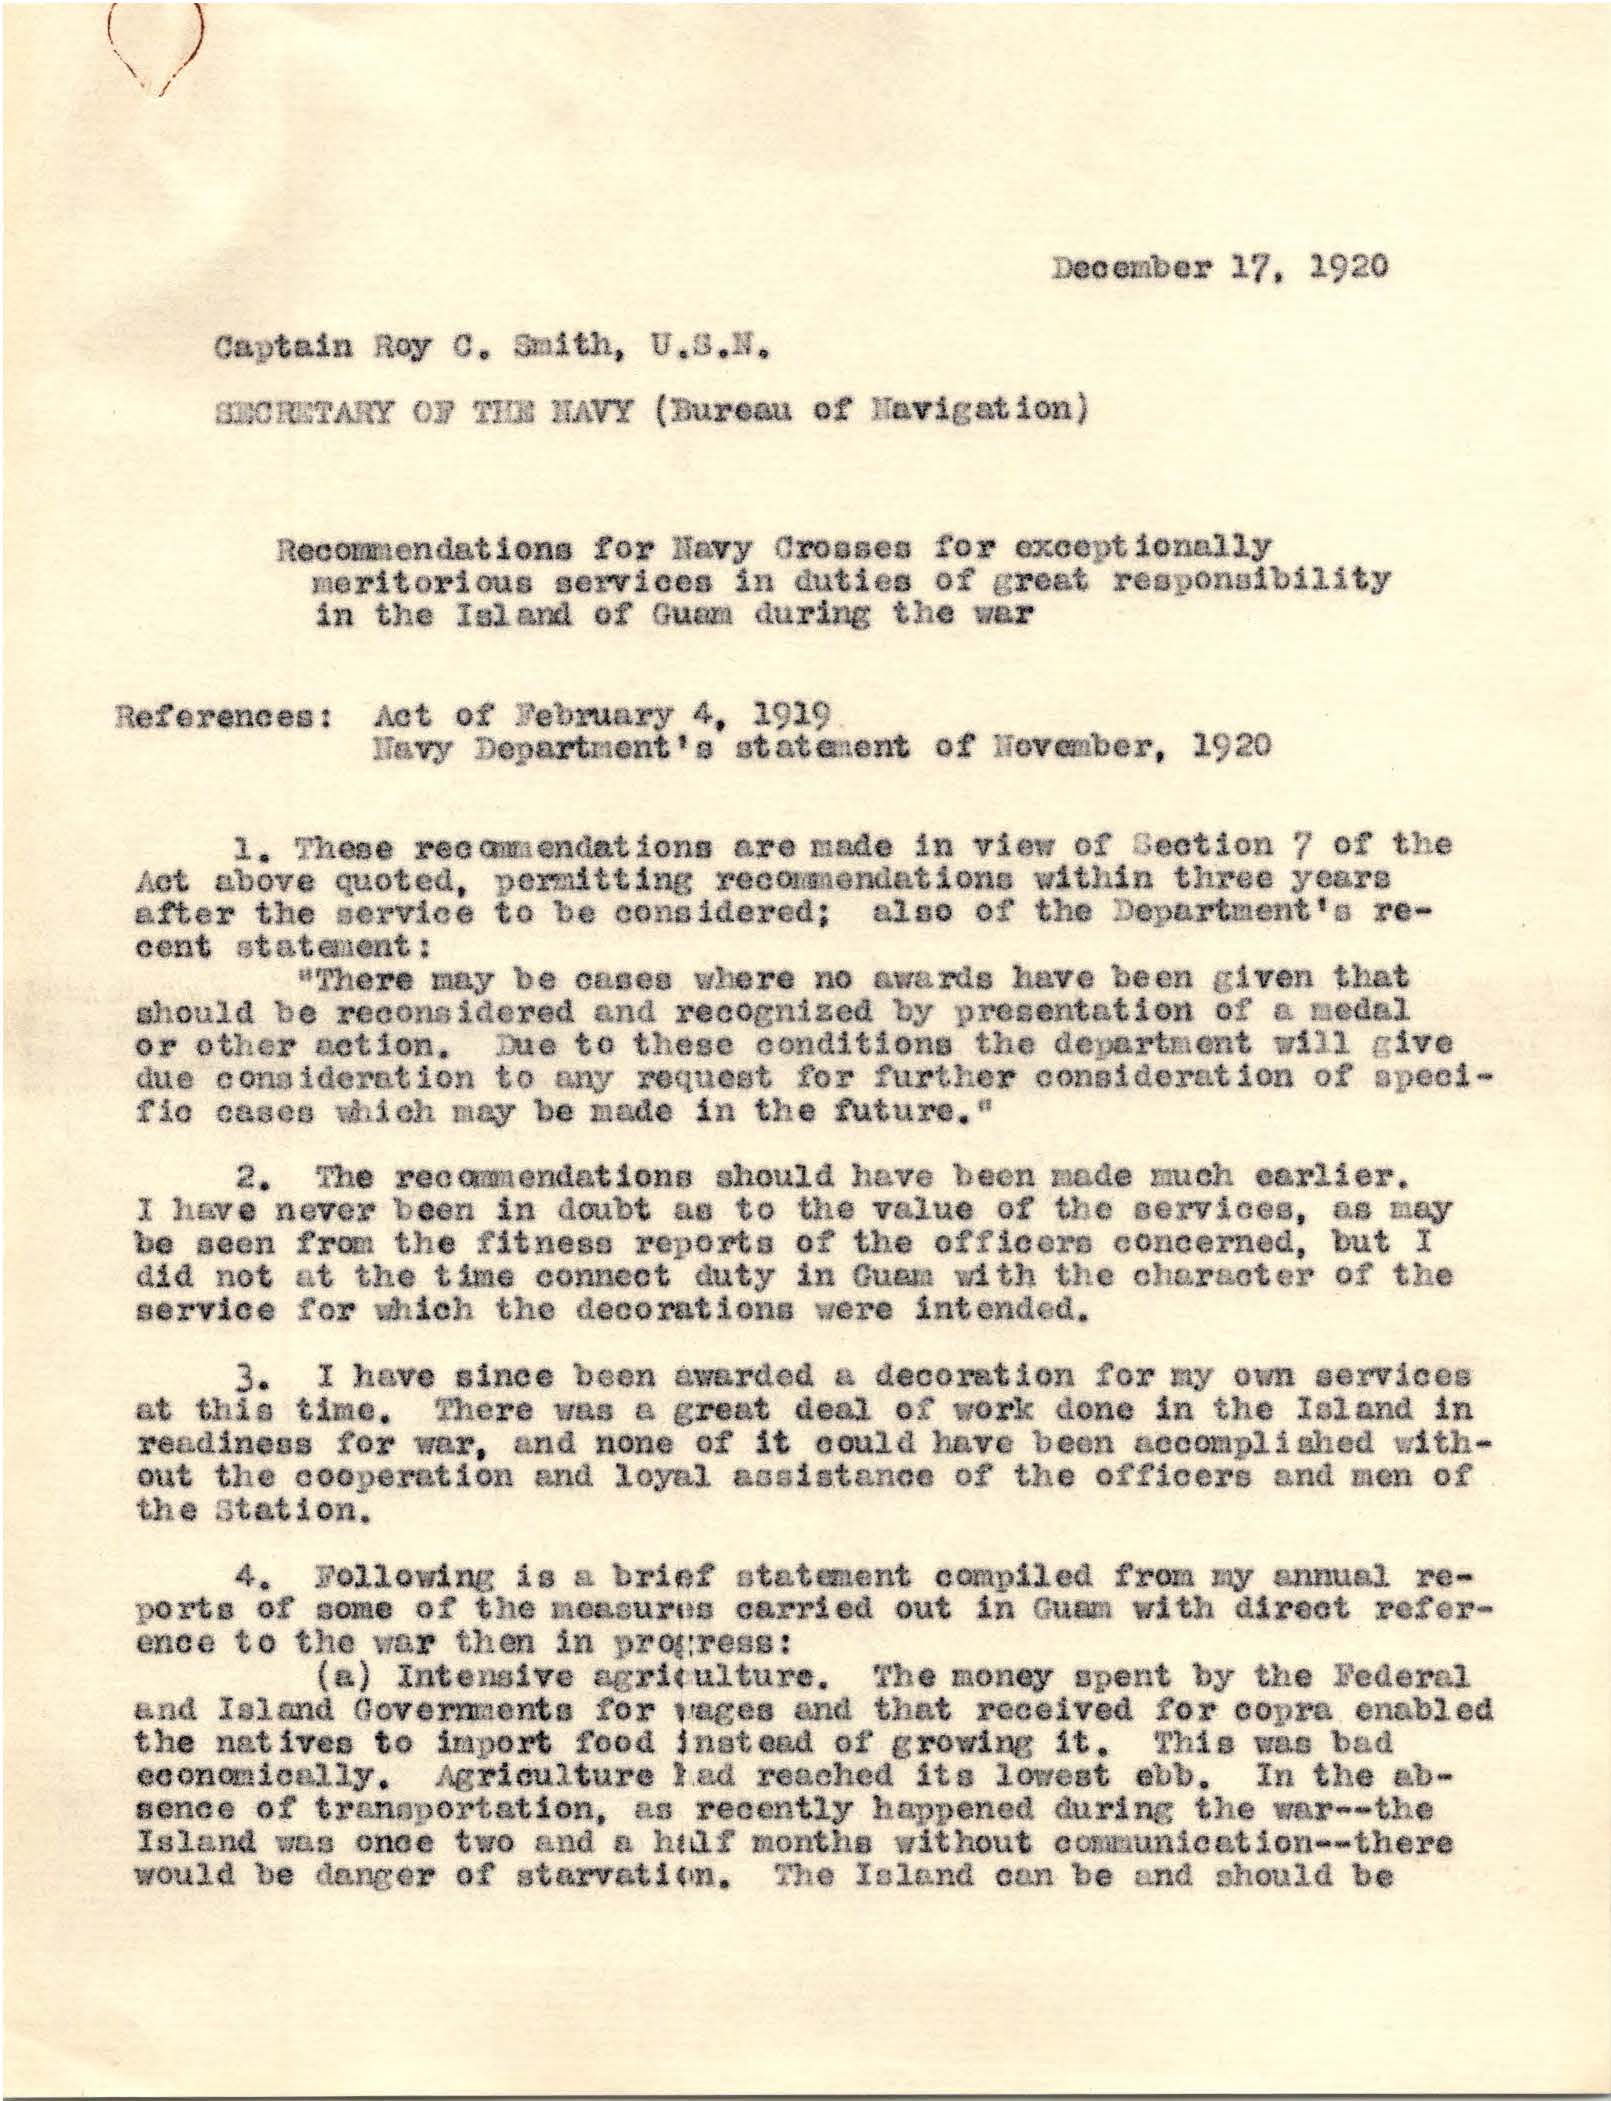 Letter from Roy Campbell Smith to Secretary of the Navy